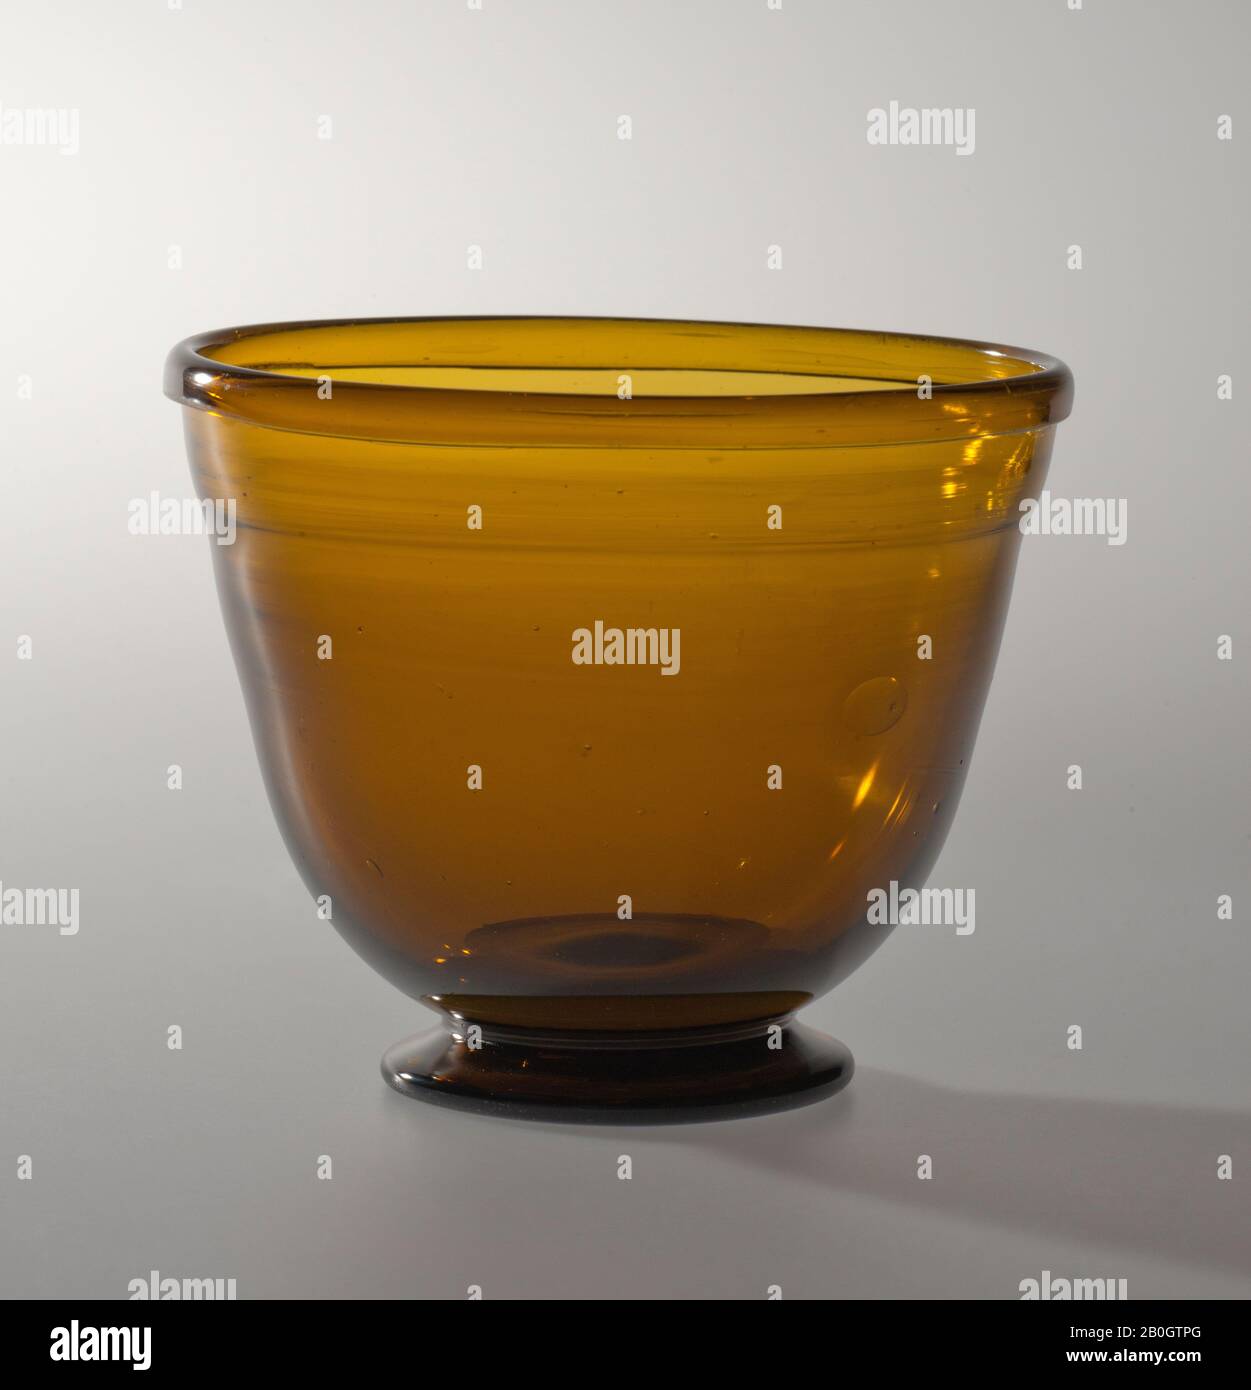 Maker unknown, Bowl, 19th century, Amber glass, Height: 3 in. (7.6 cm Stock Photo